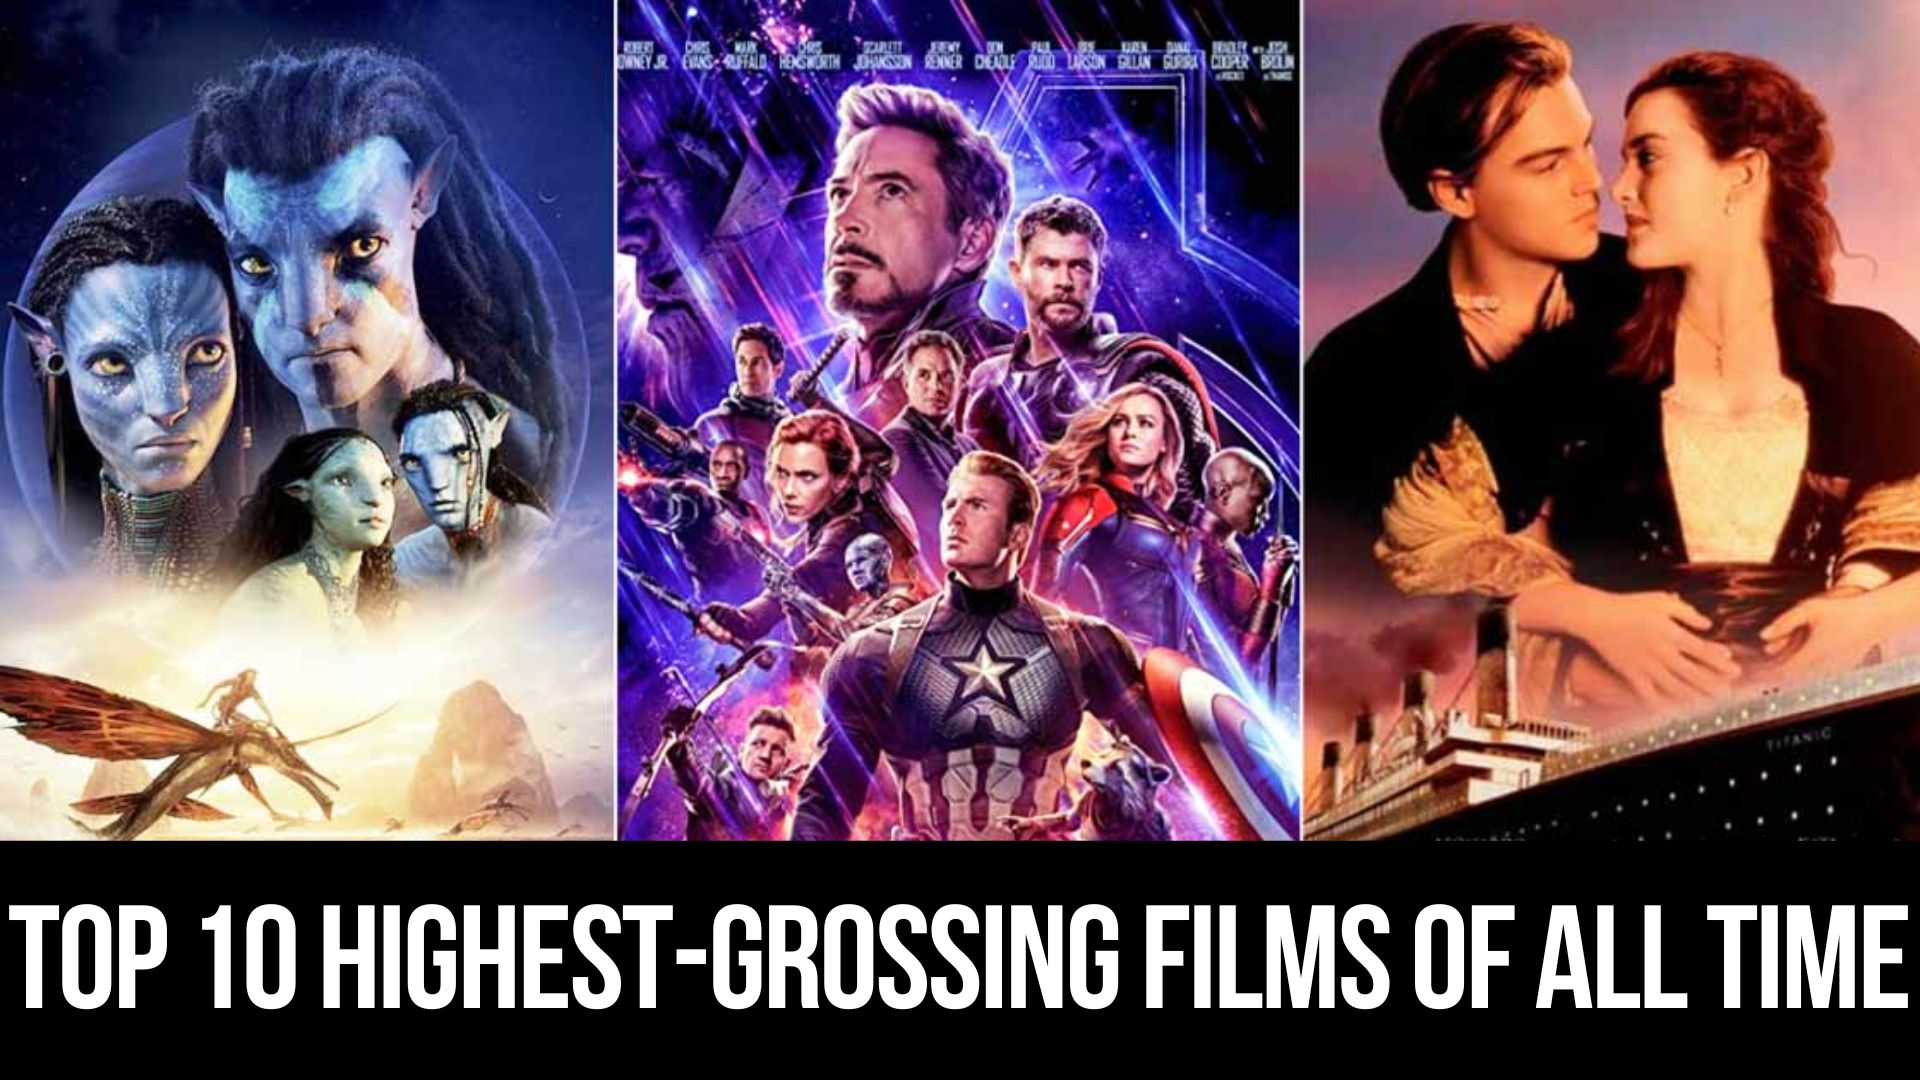 Top 10 Highest-Grossing Films of All Time